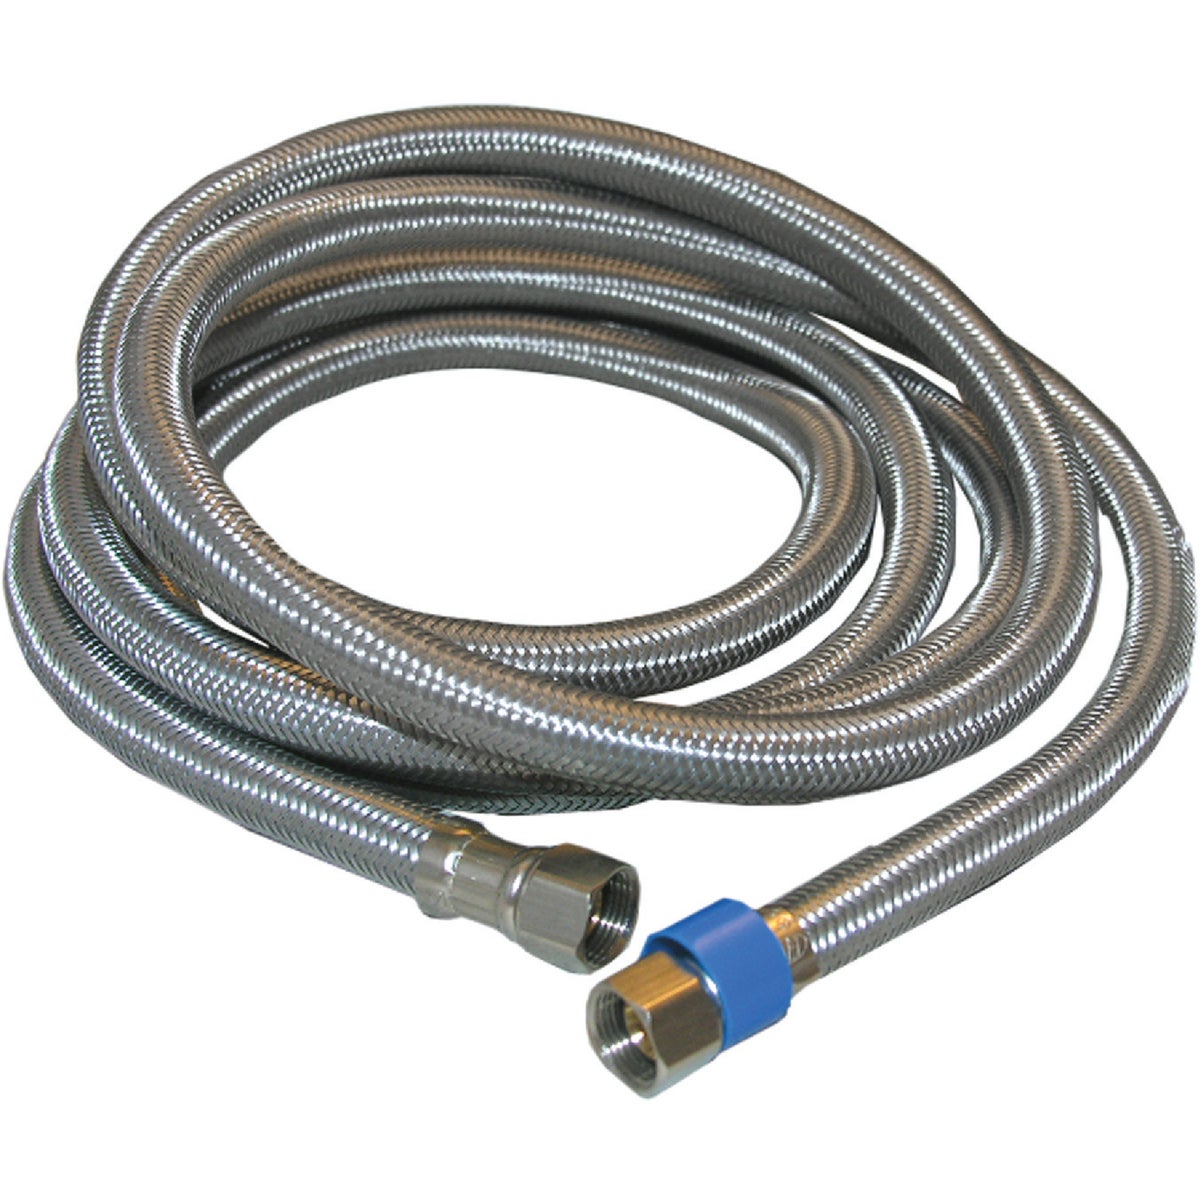 Lasco 3/8 In.C x 3/8 In.C x 96 In. L Braided Stainless Steel Flex Line Appliance Water Connector